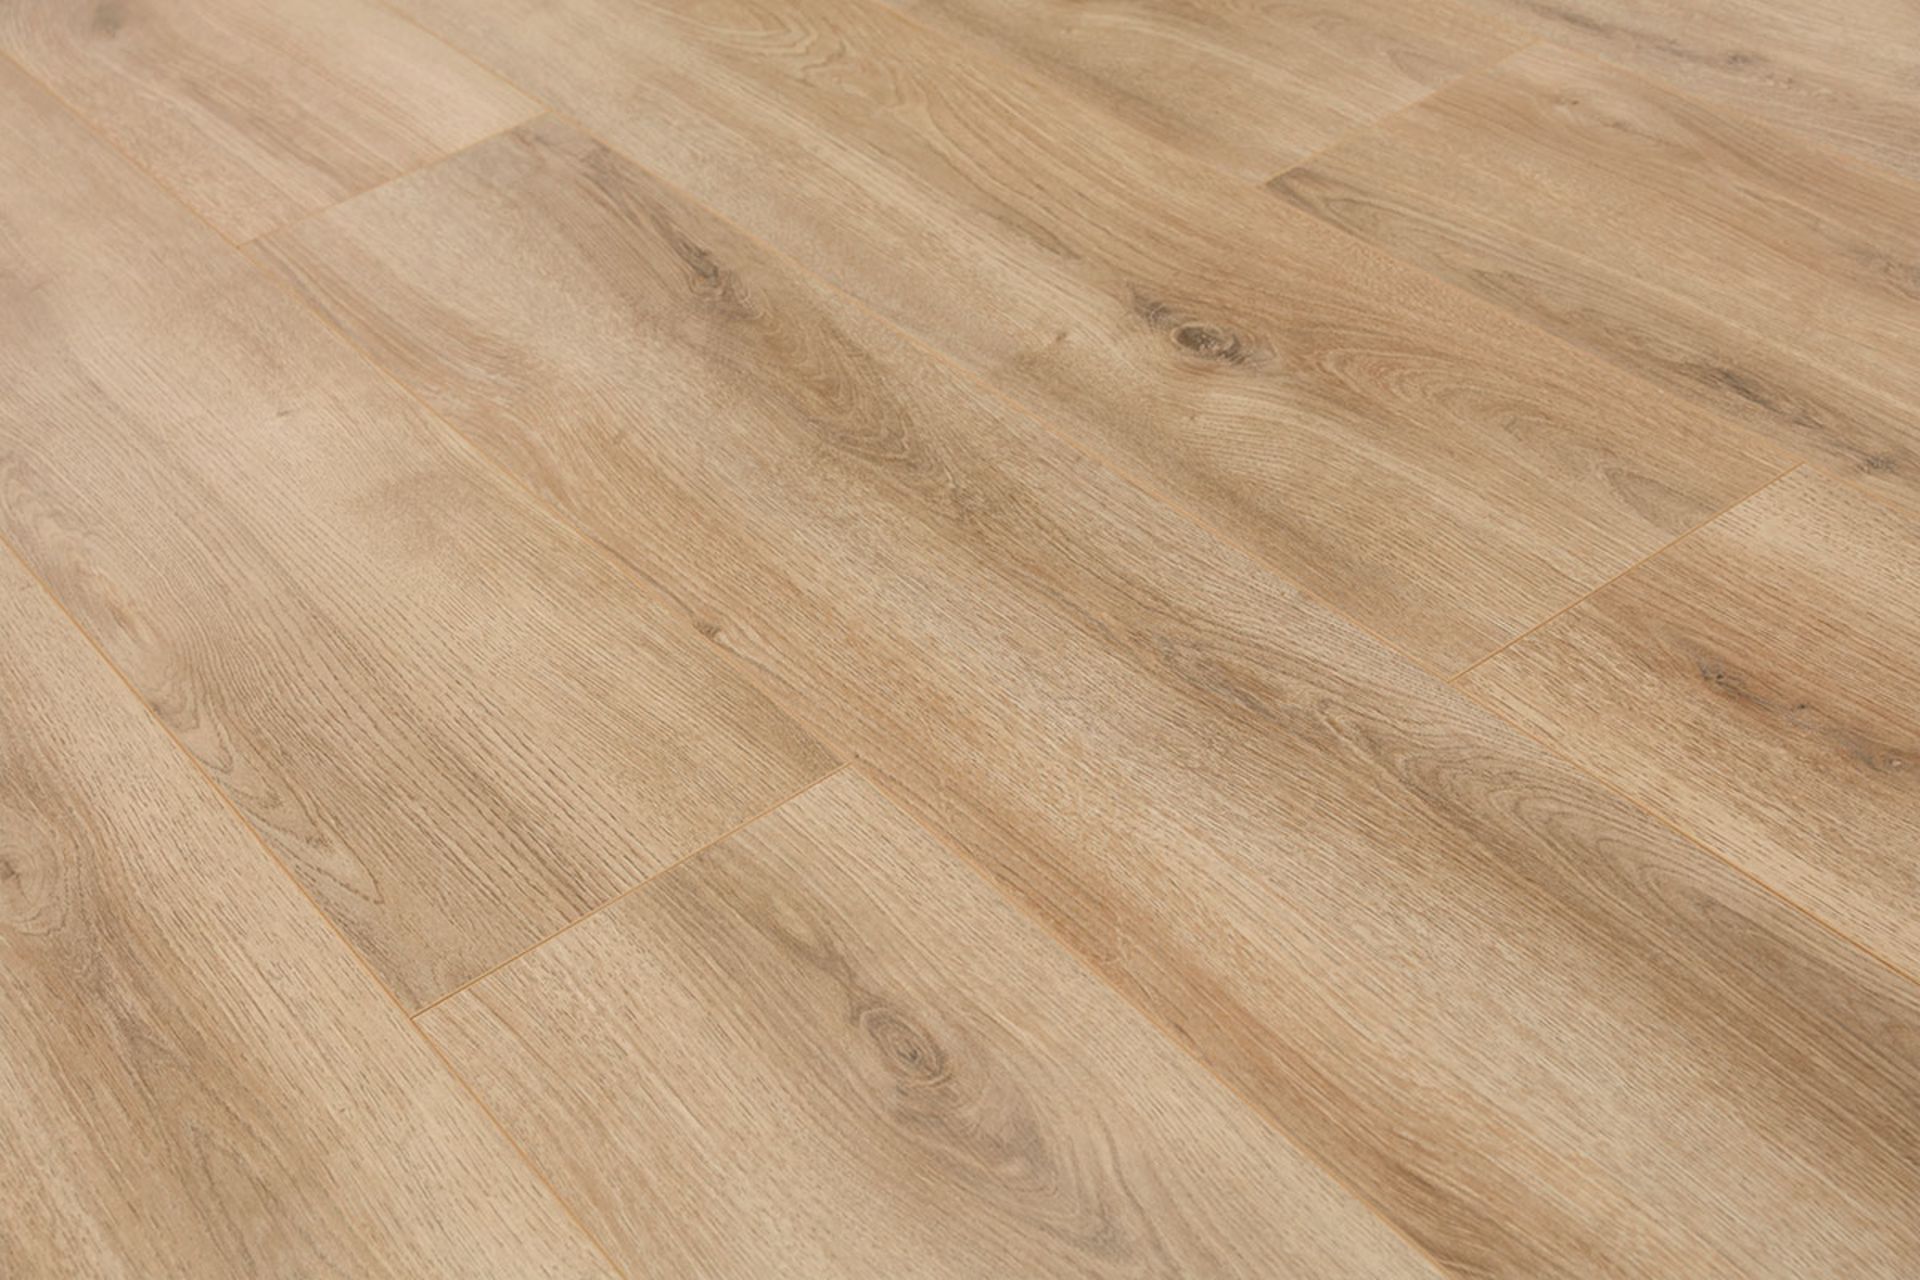 NEW 9.56m2 LAMINATE FLOORING SUMMER NATURAL OAK. With a warming natural oak tone, this floor is... - Image 2 of 2